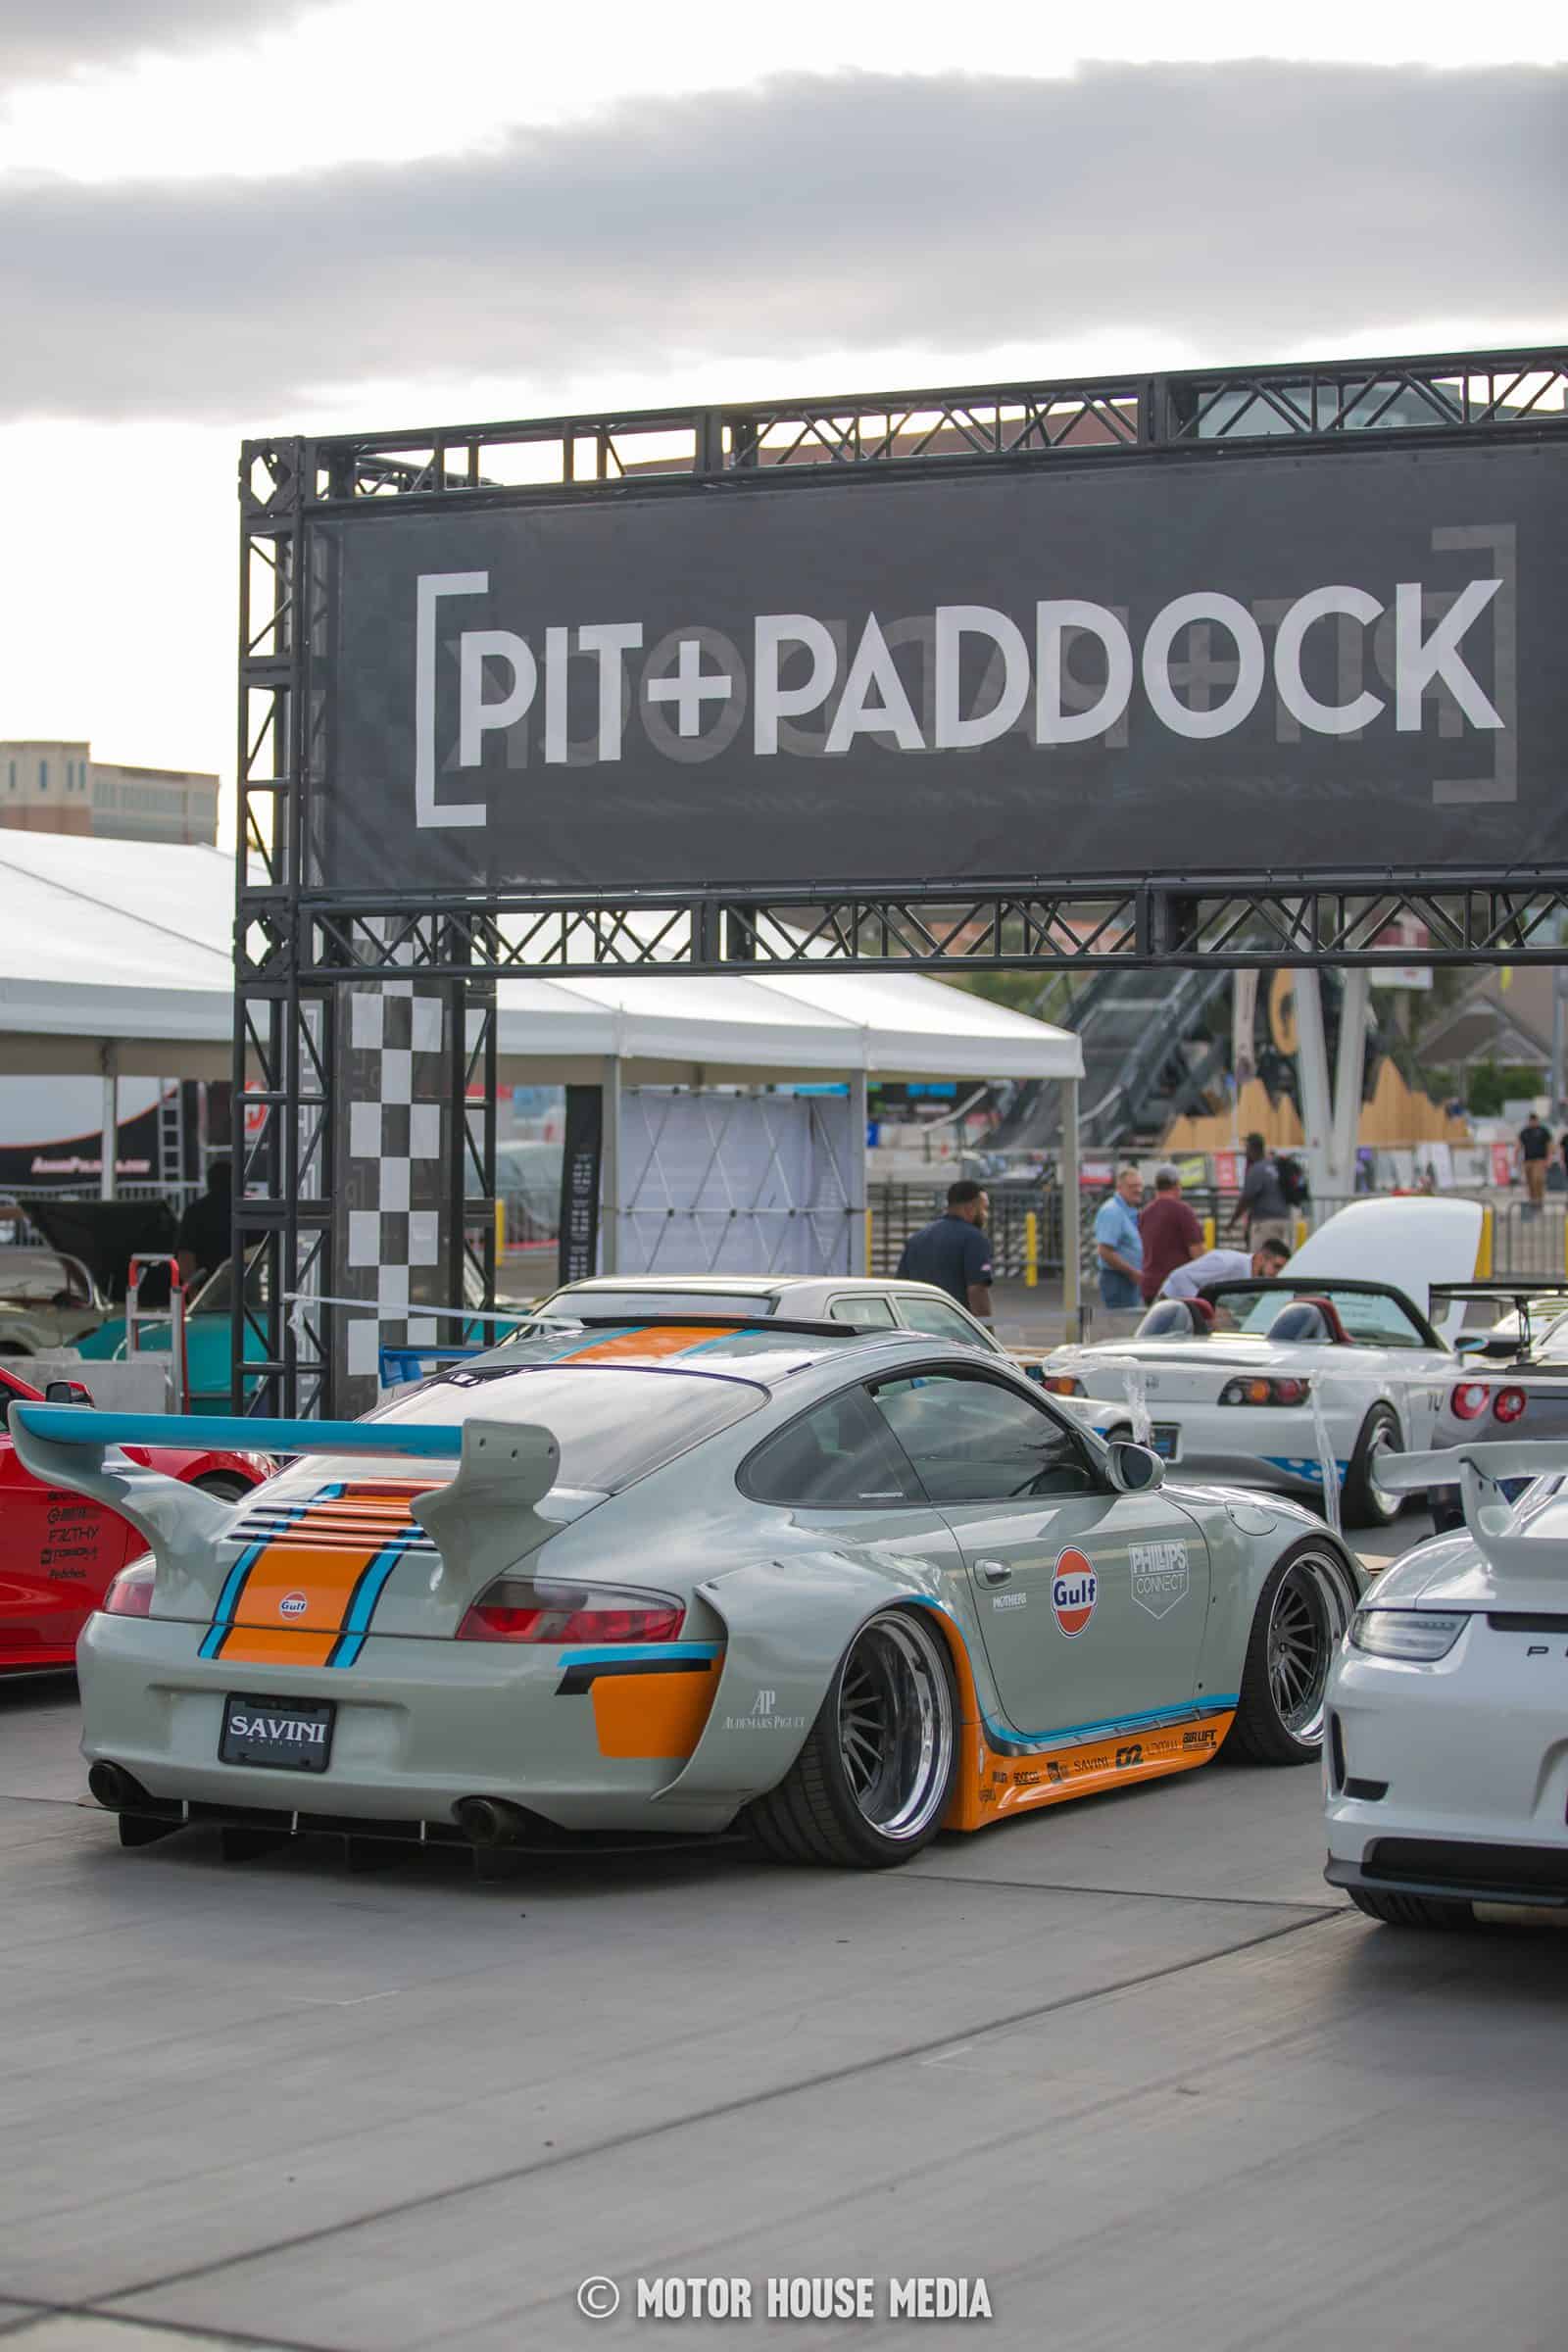 Pit & Paddock booth at the Sema show